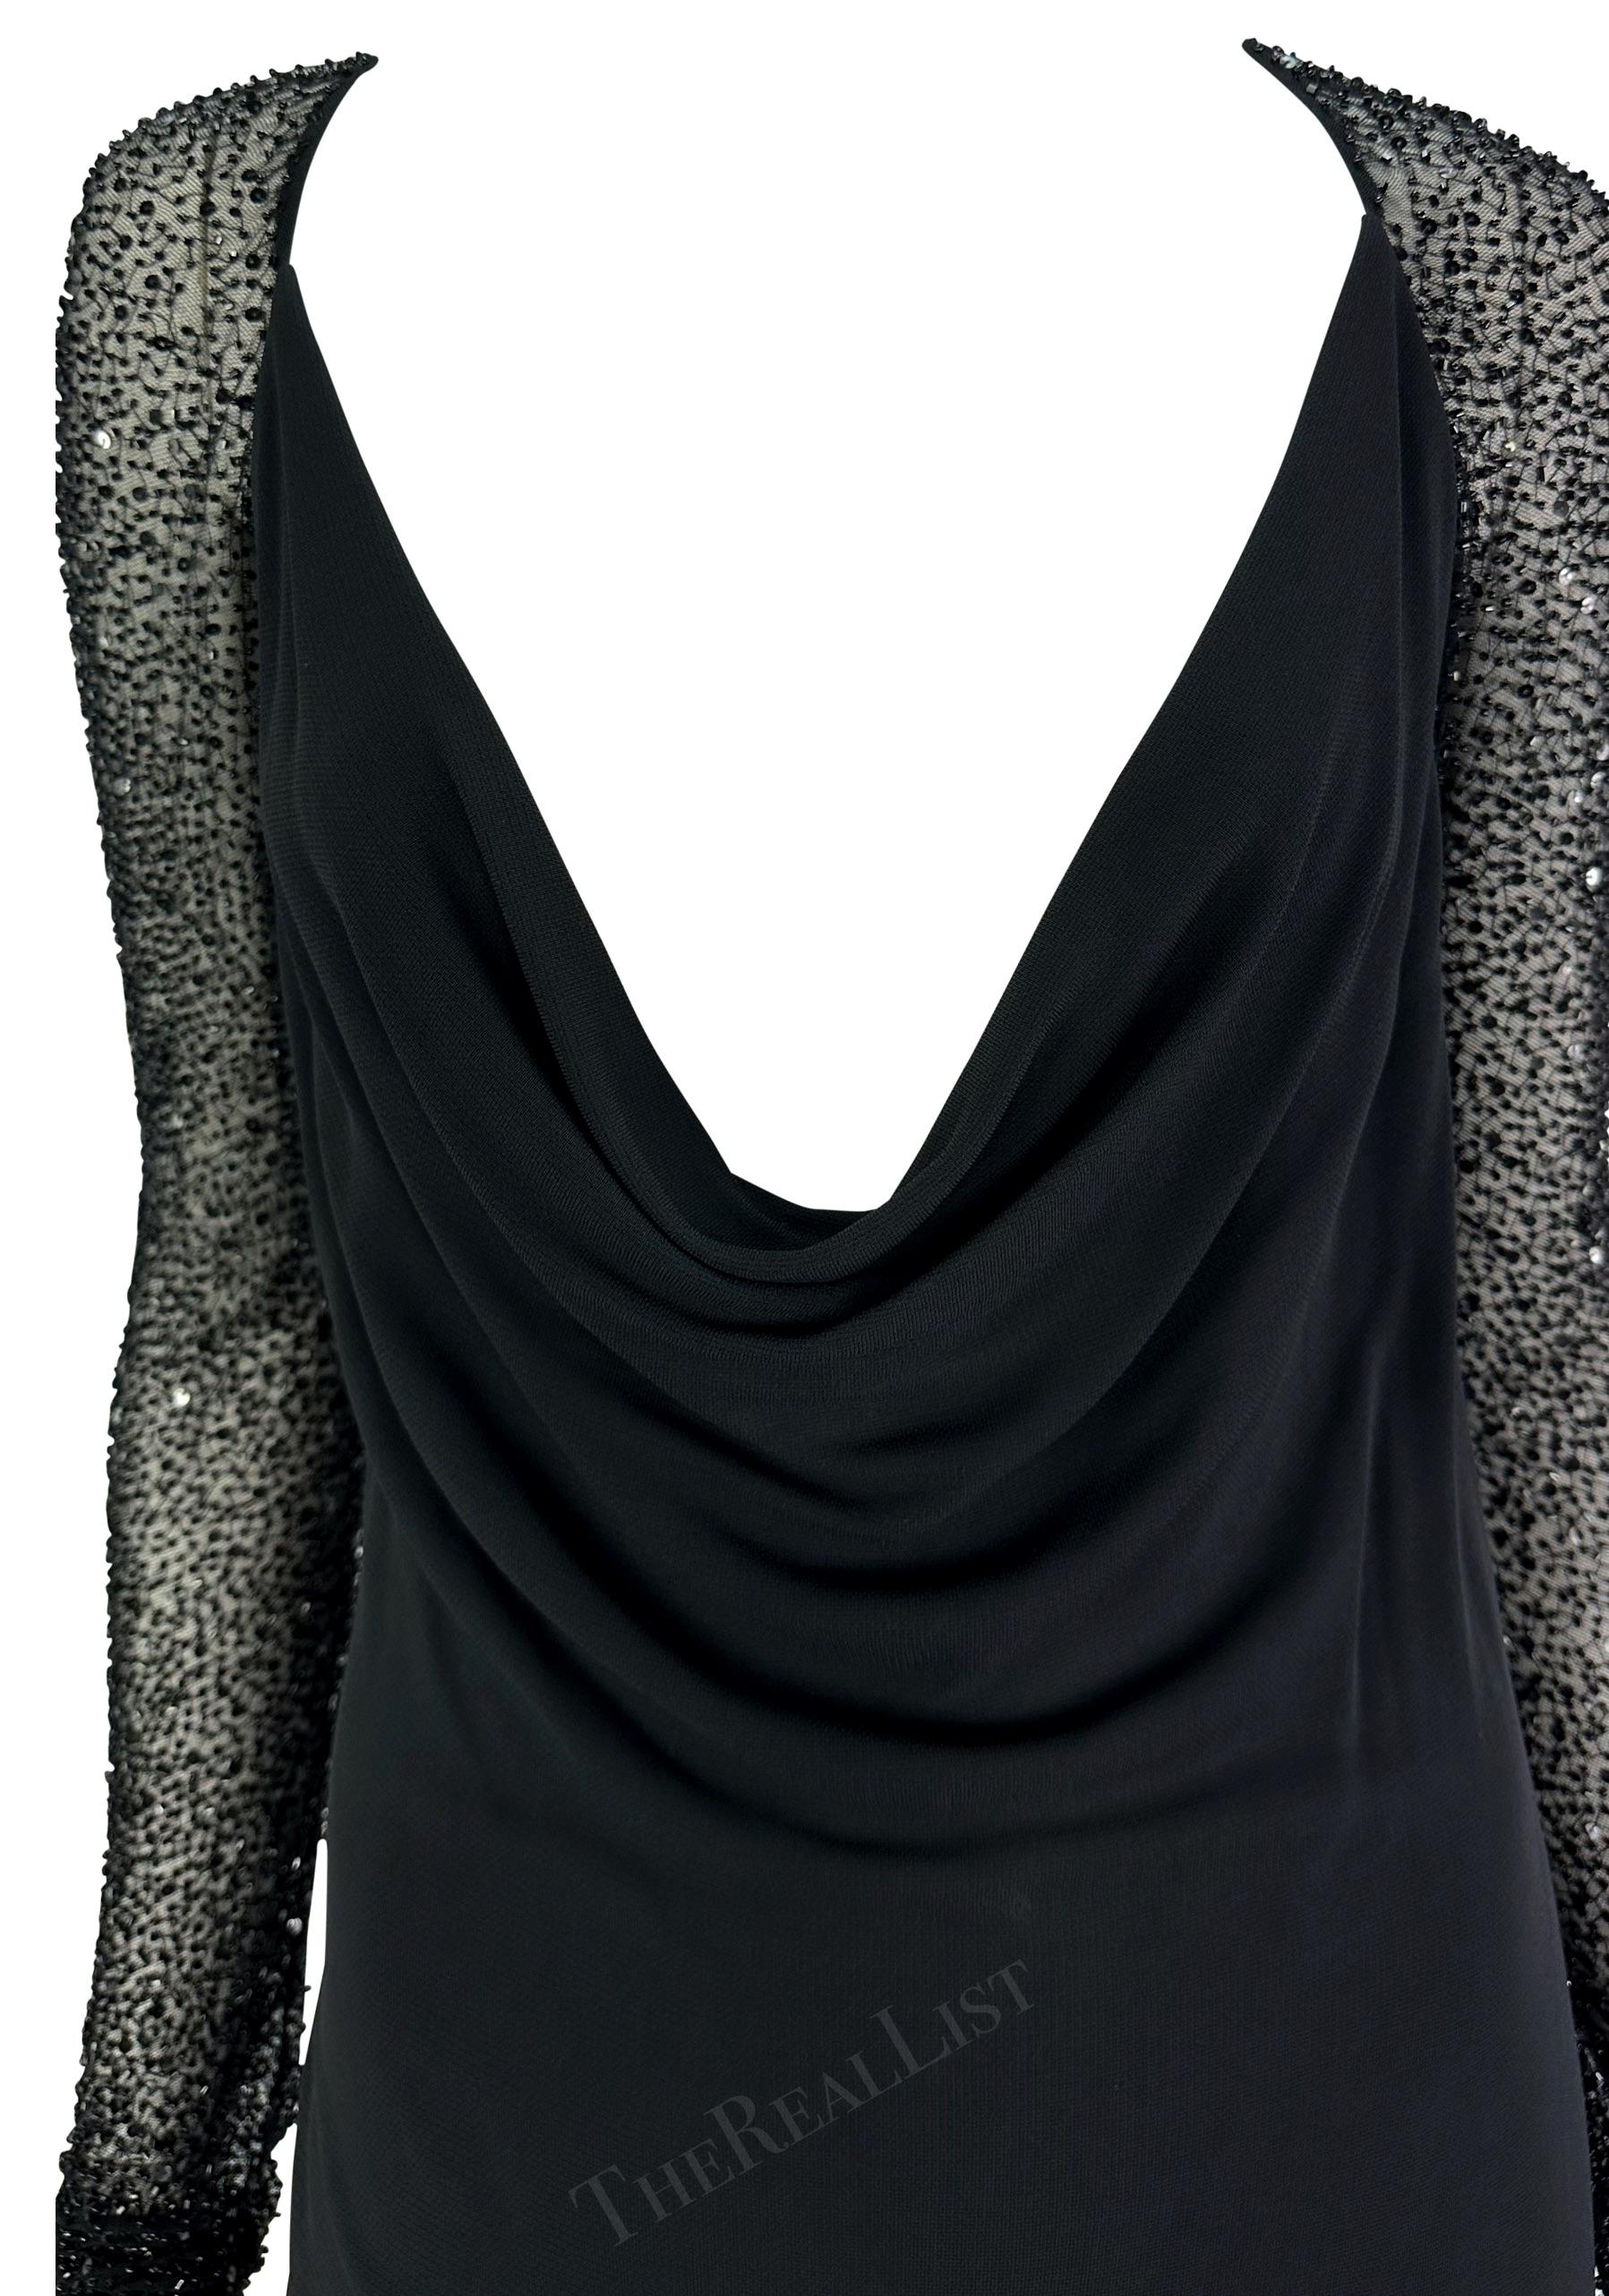 F/W 1997 Halston by Randolph Duke Runway Black Cowl Neck Beaded Dress In Excellent Condition For Sale In West Hollywood, CA